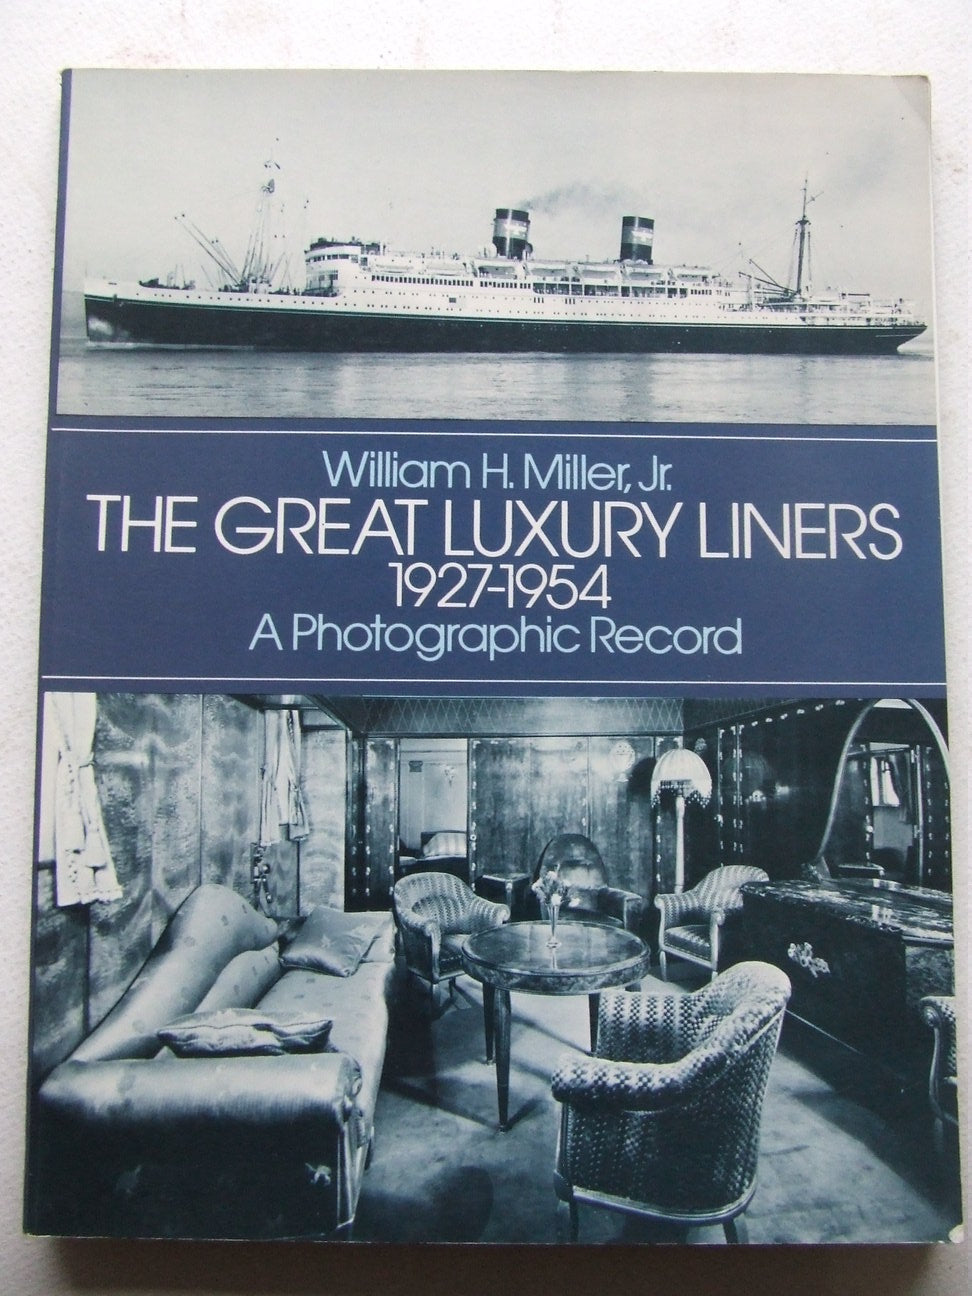 The Great Luxury Liners 1927 - 1954, a photographic record